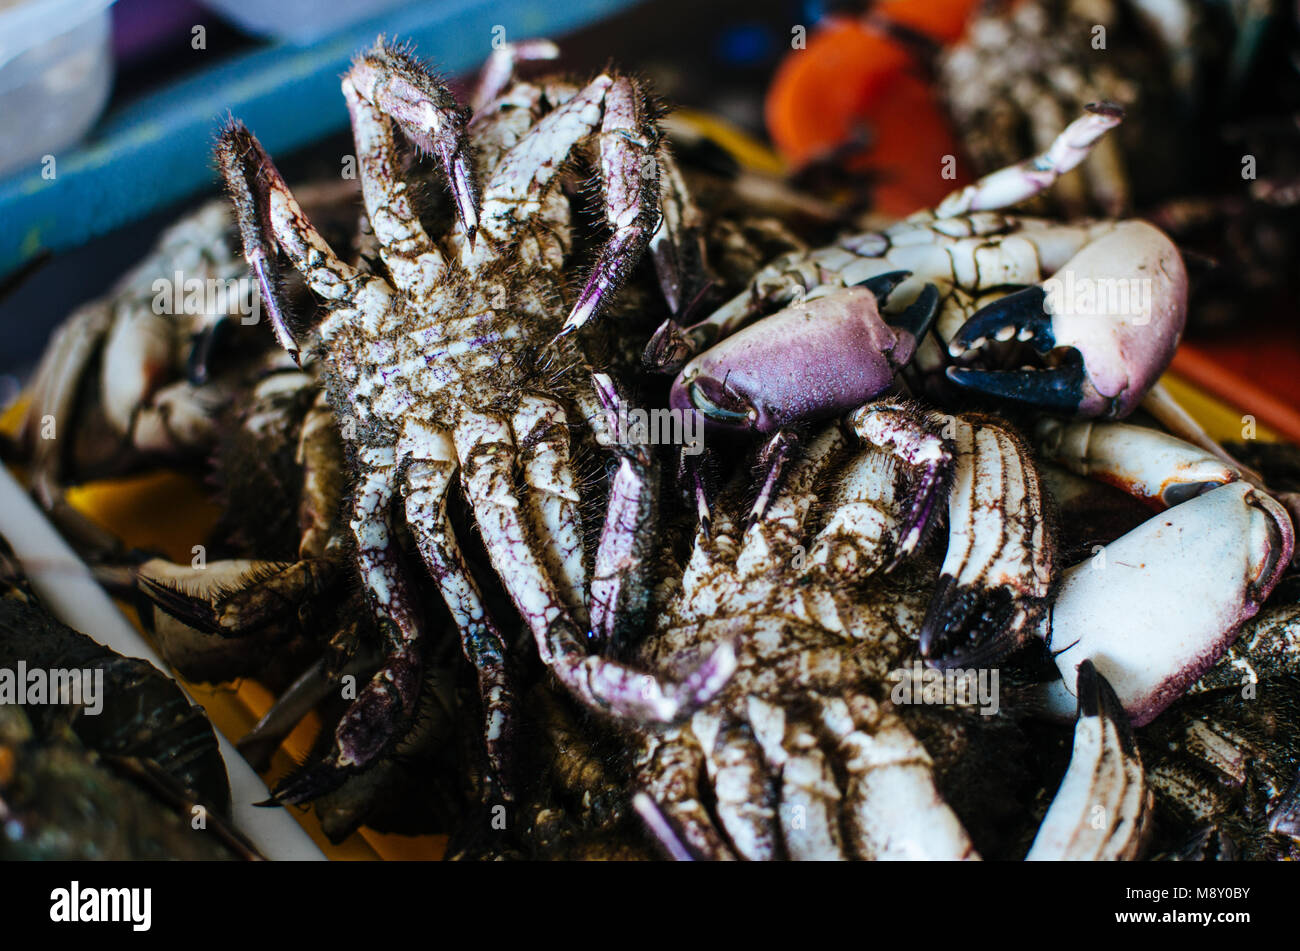 Freshly extracted sea crabs ready for sale in the market Stock Photo